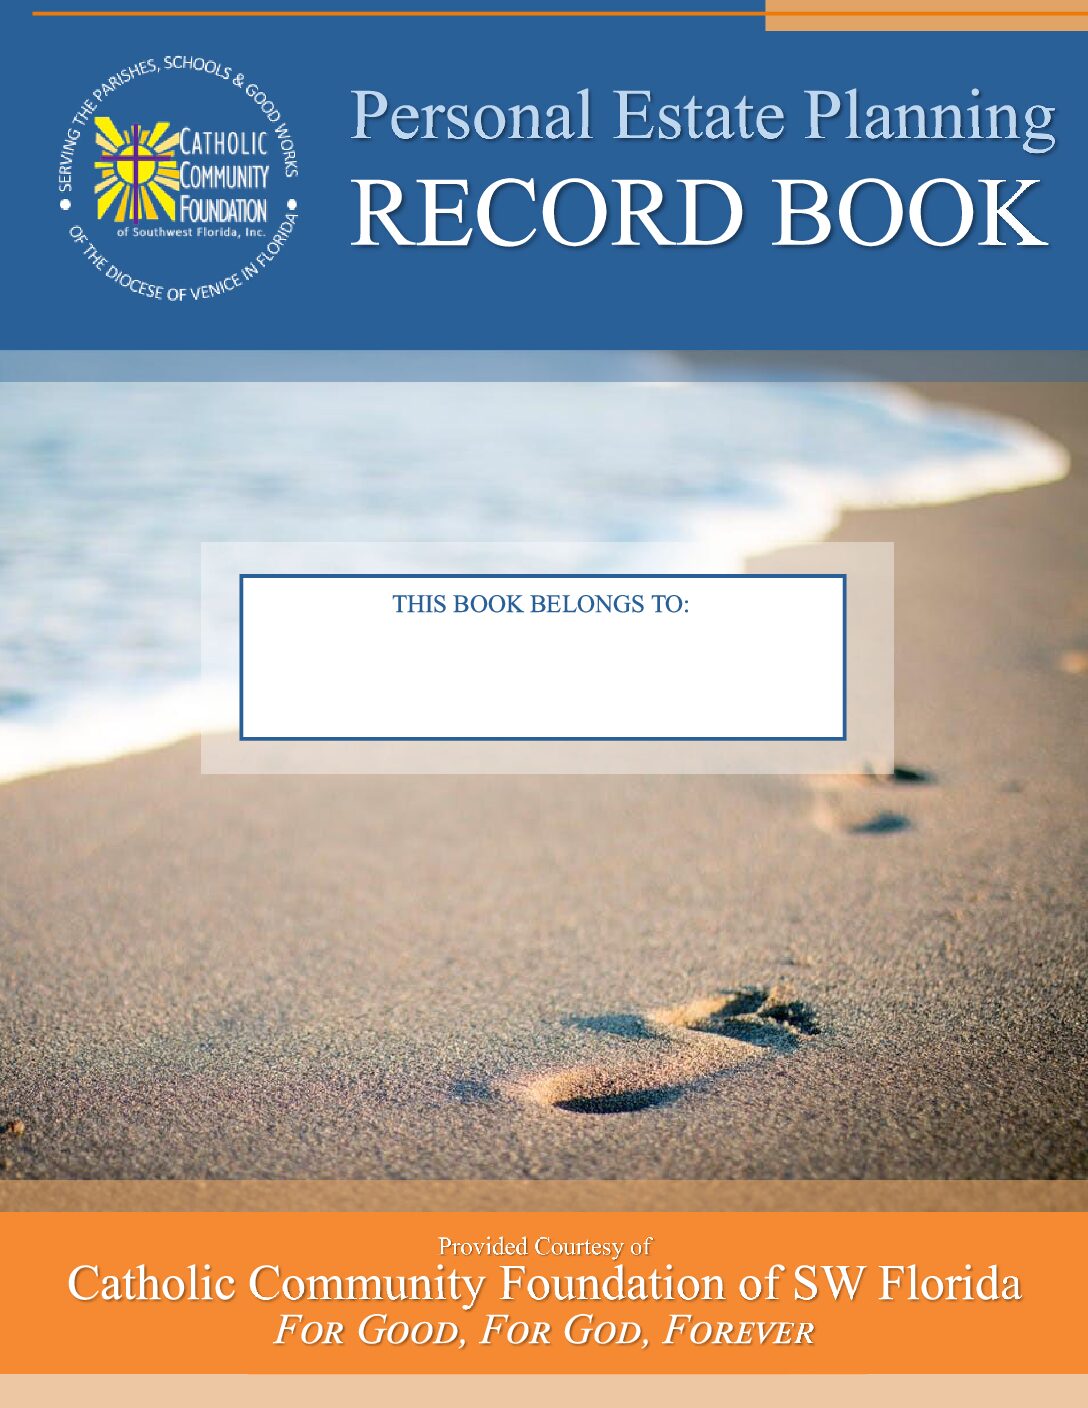 Personal Estate Planning Record Book